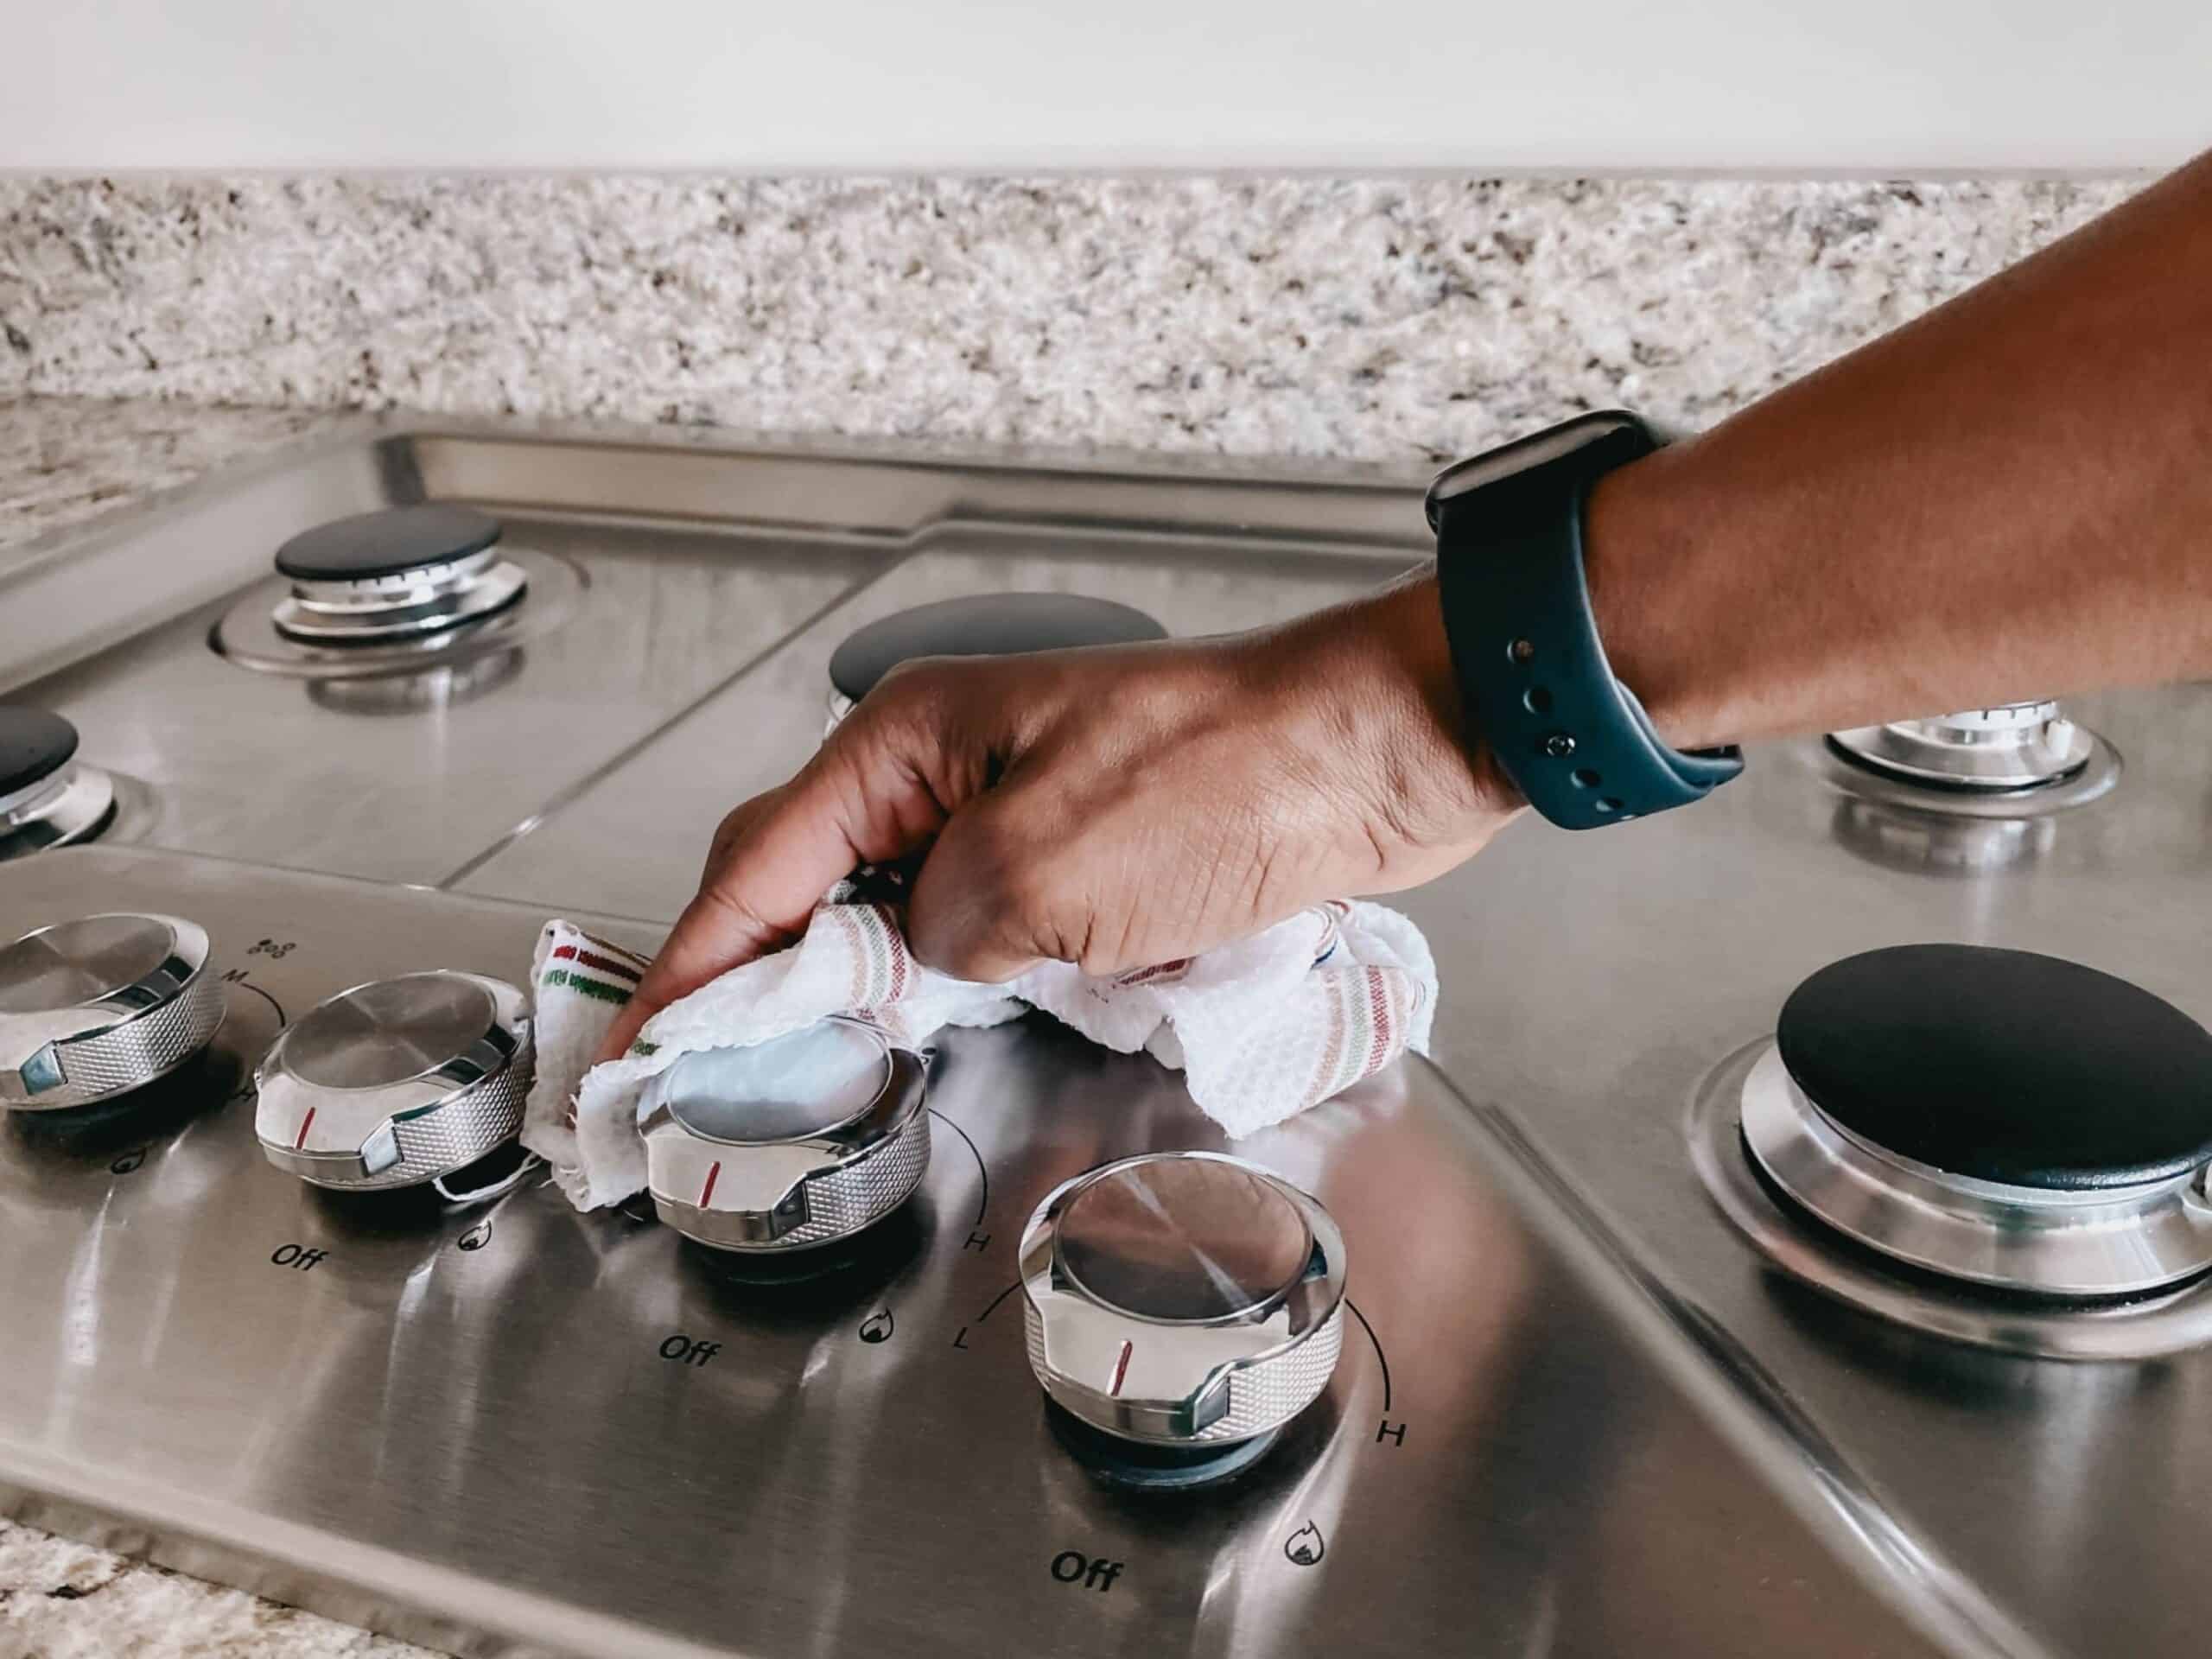 man's hand wiping down cooktop with wet dishcloth